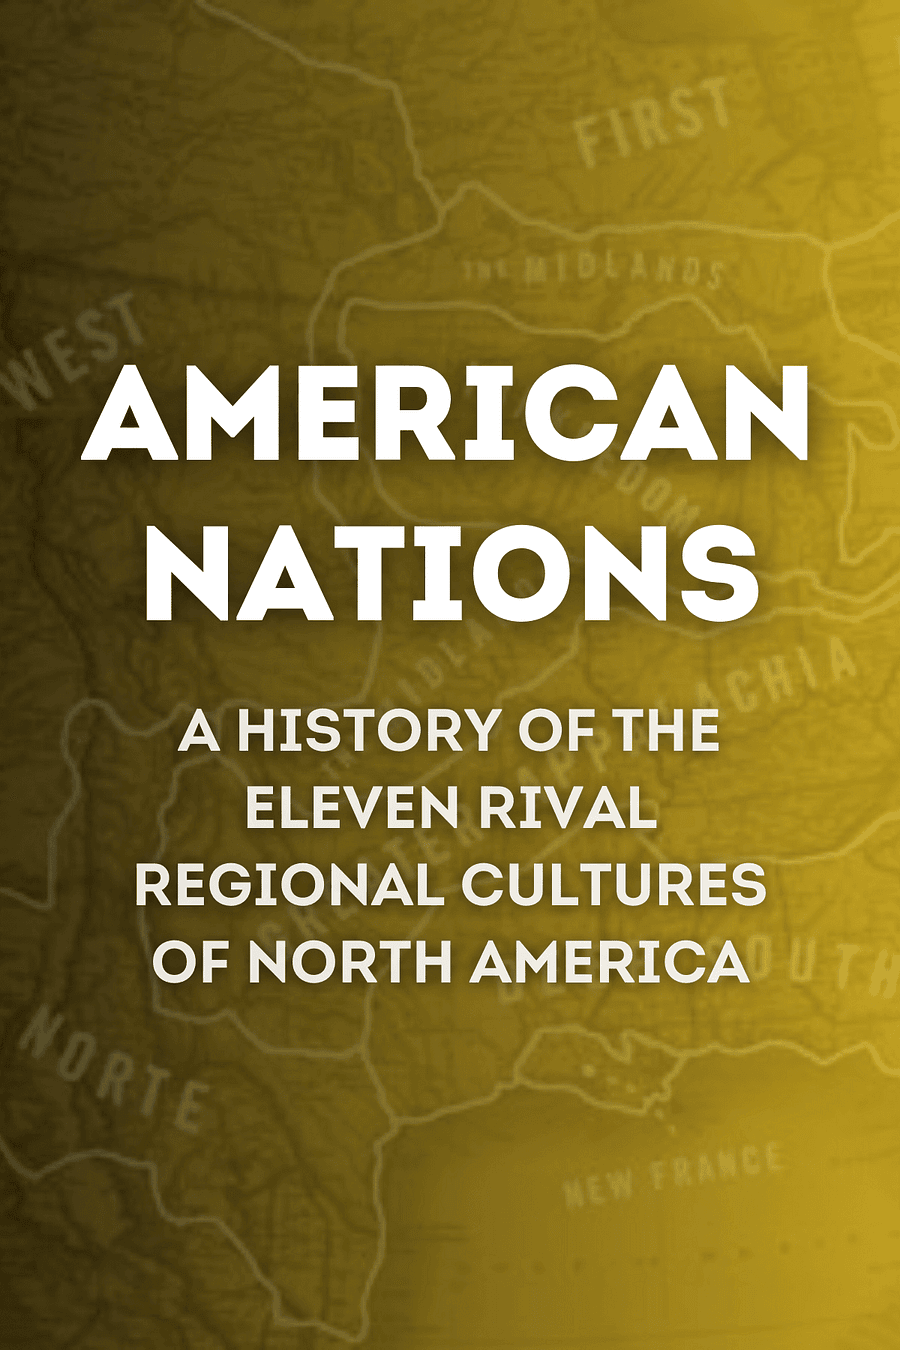 American Nations by Colin Woodard - Book Summary